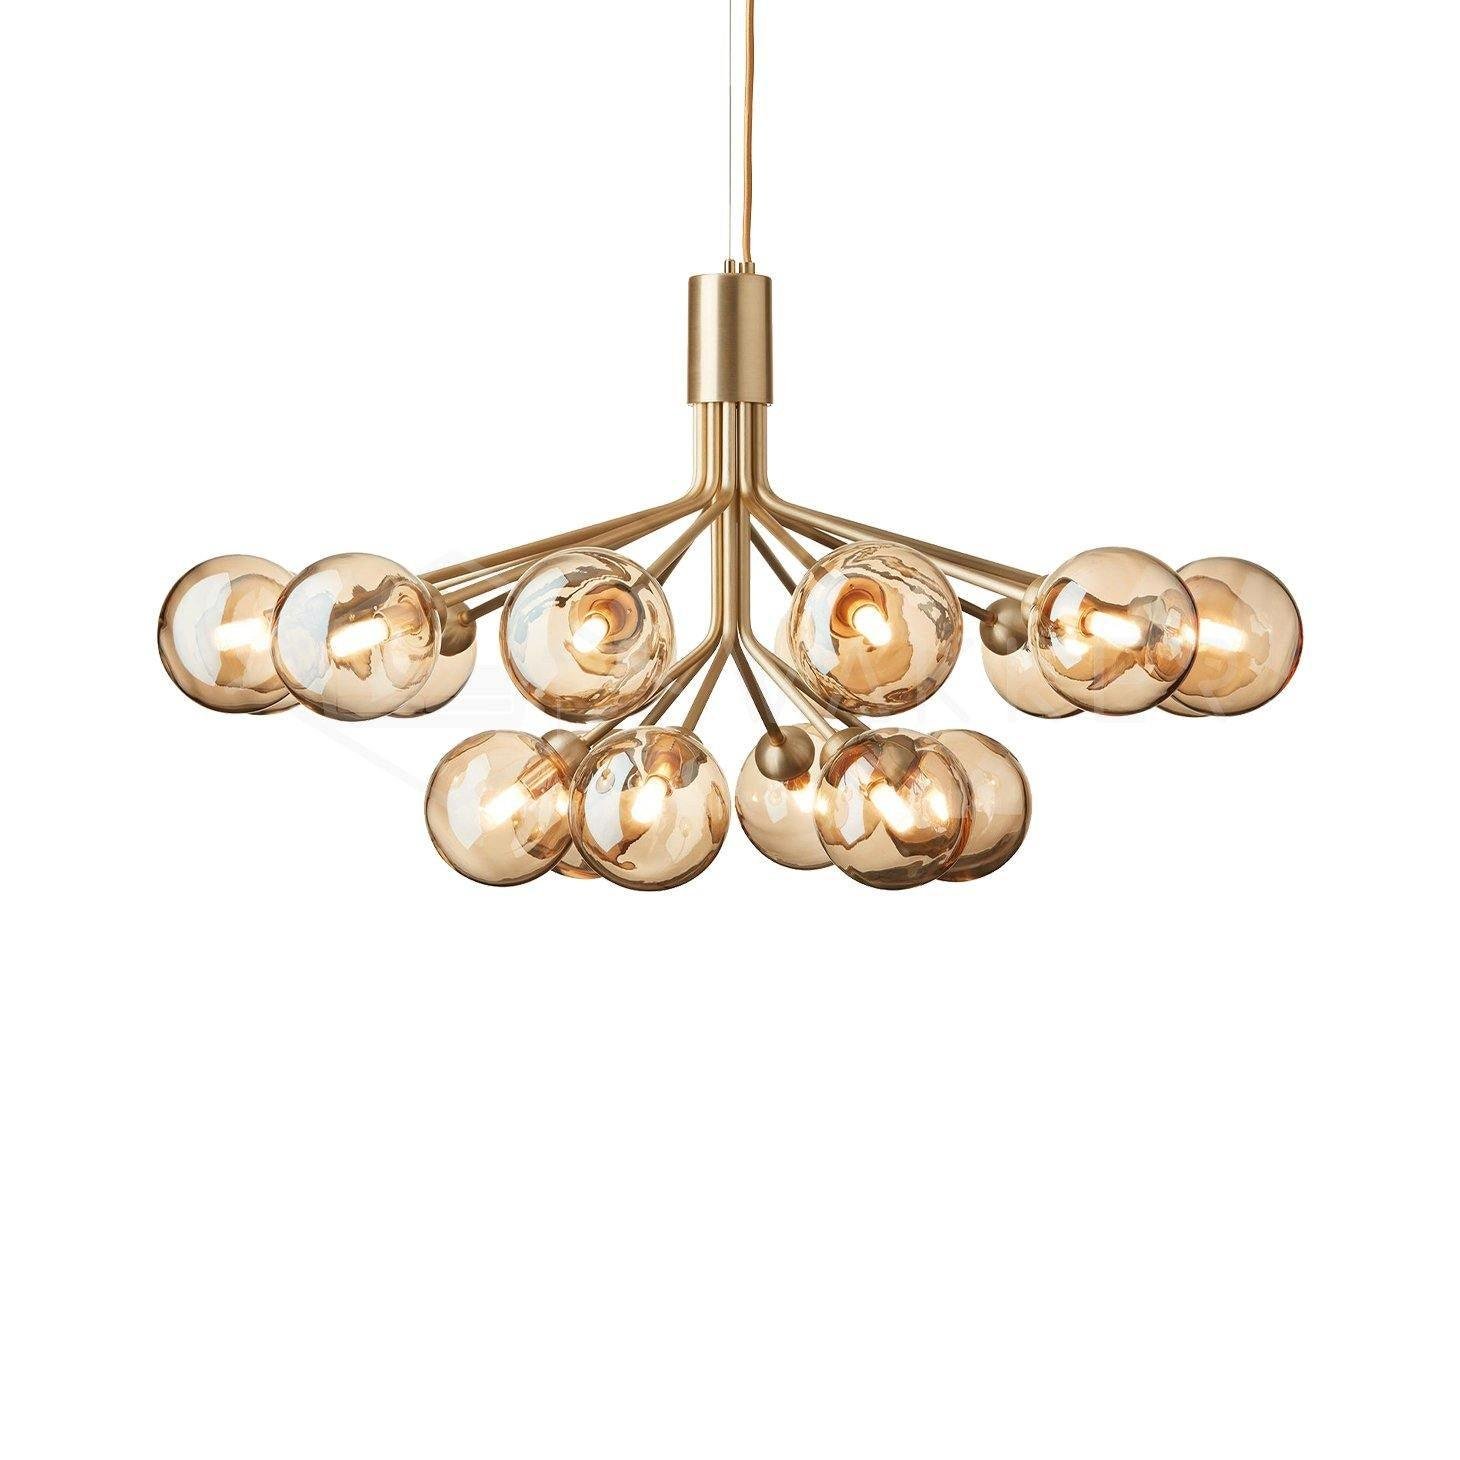 18-Head Chandeliers in Gold and Amber Finish, Dimensions: ∅ 39.4" x H 21.7" (Dia 100cm x H 55cm)